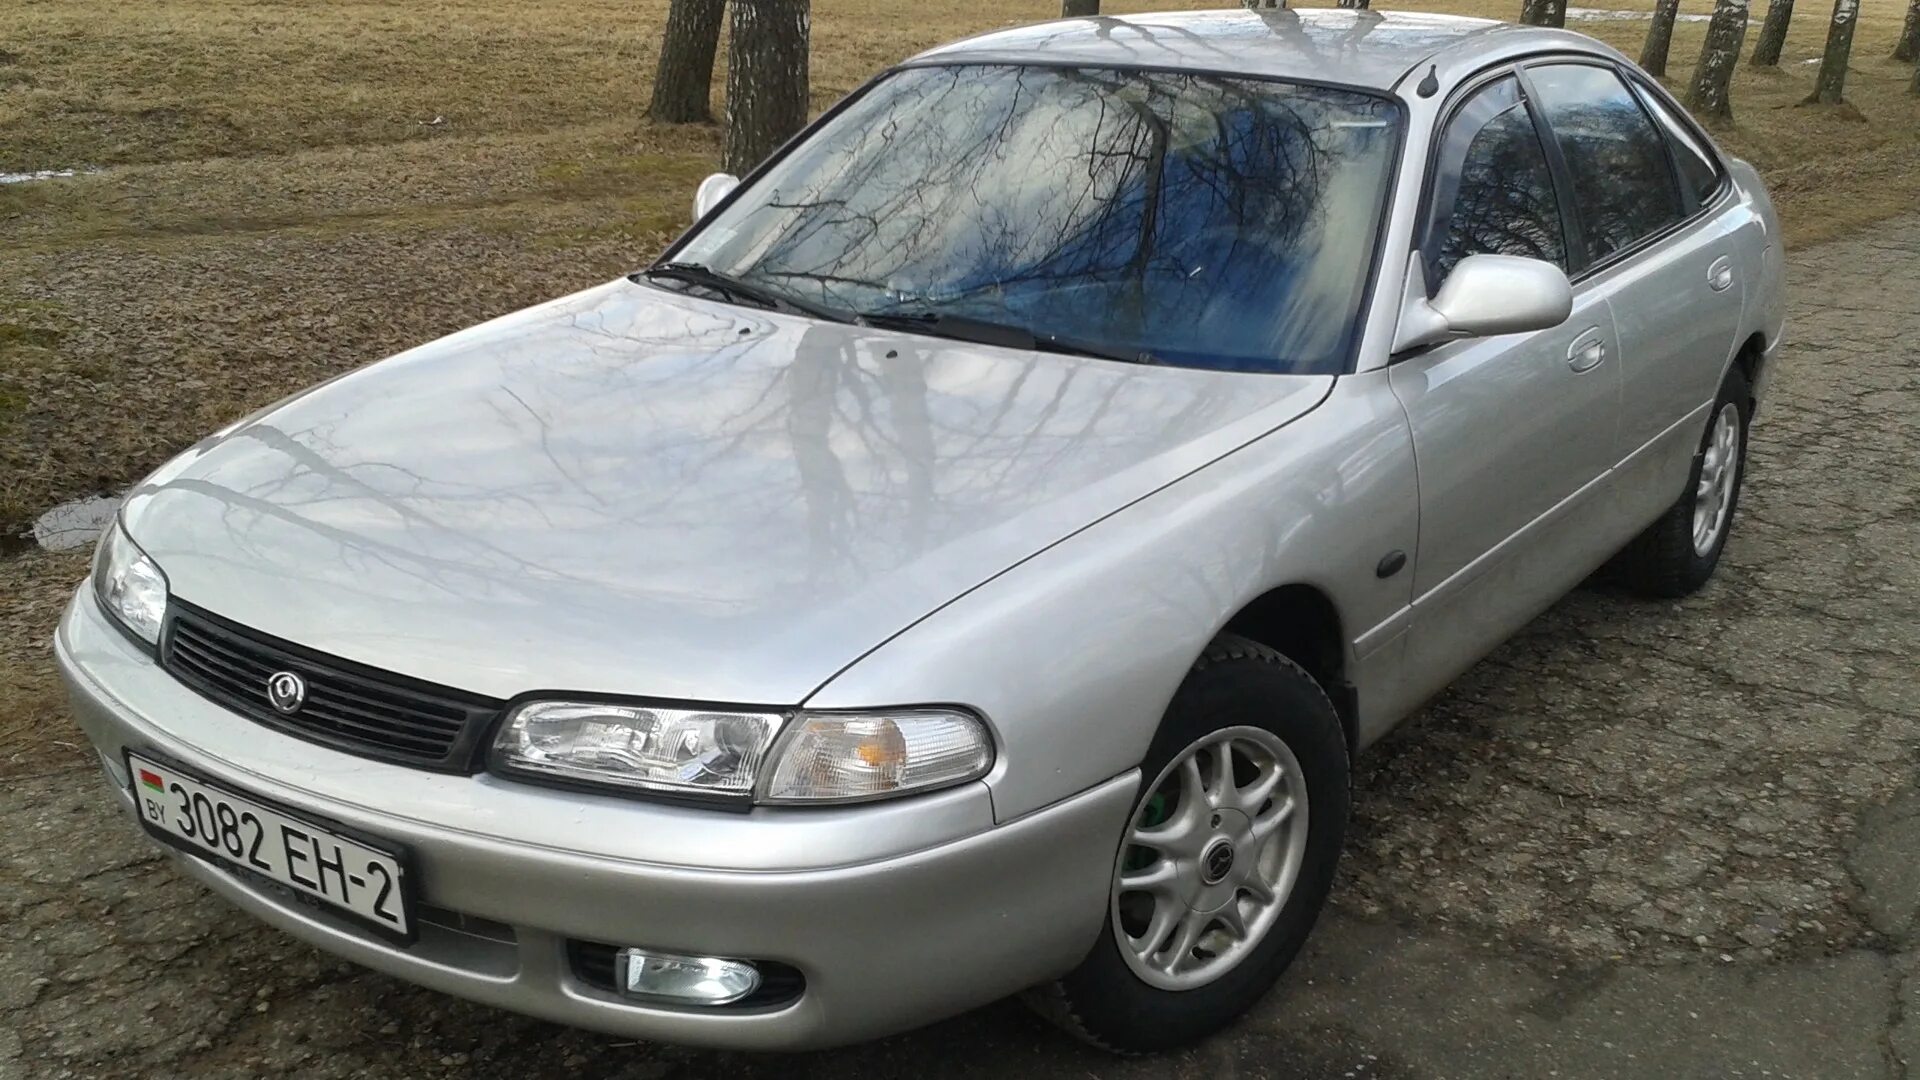 Mazda 626 1995. Мазда 626 1995г. Мазда 626 ge. Мазда 626 97г.